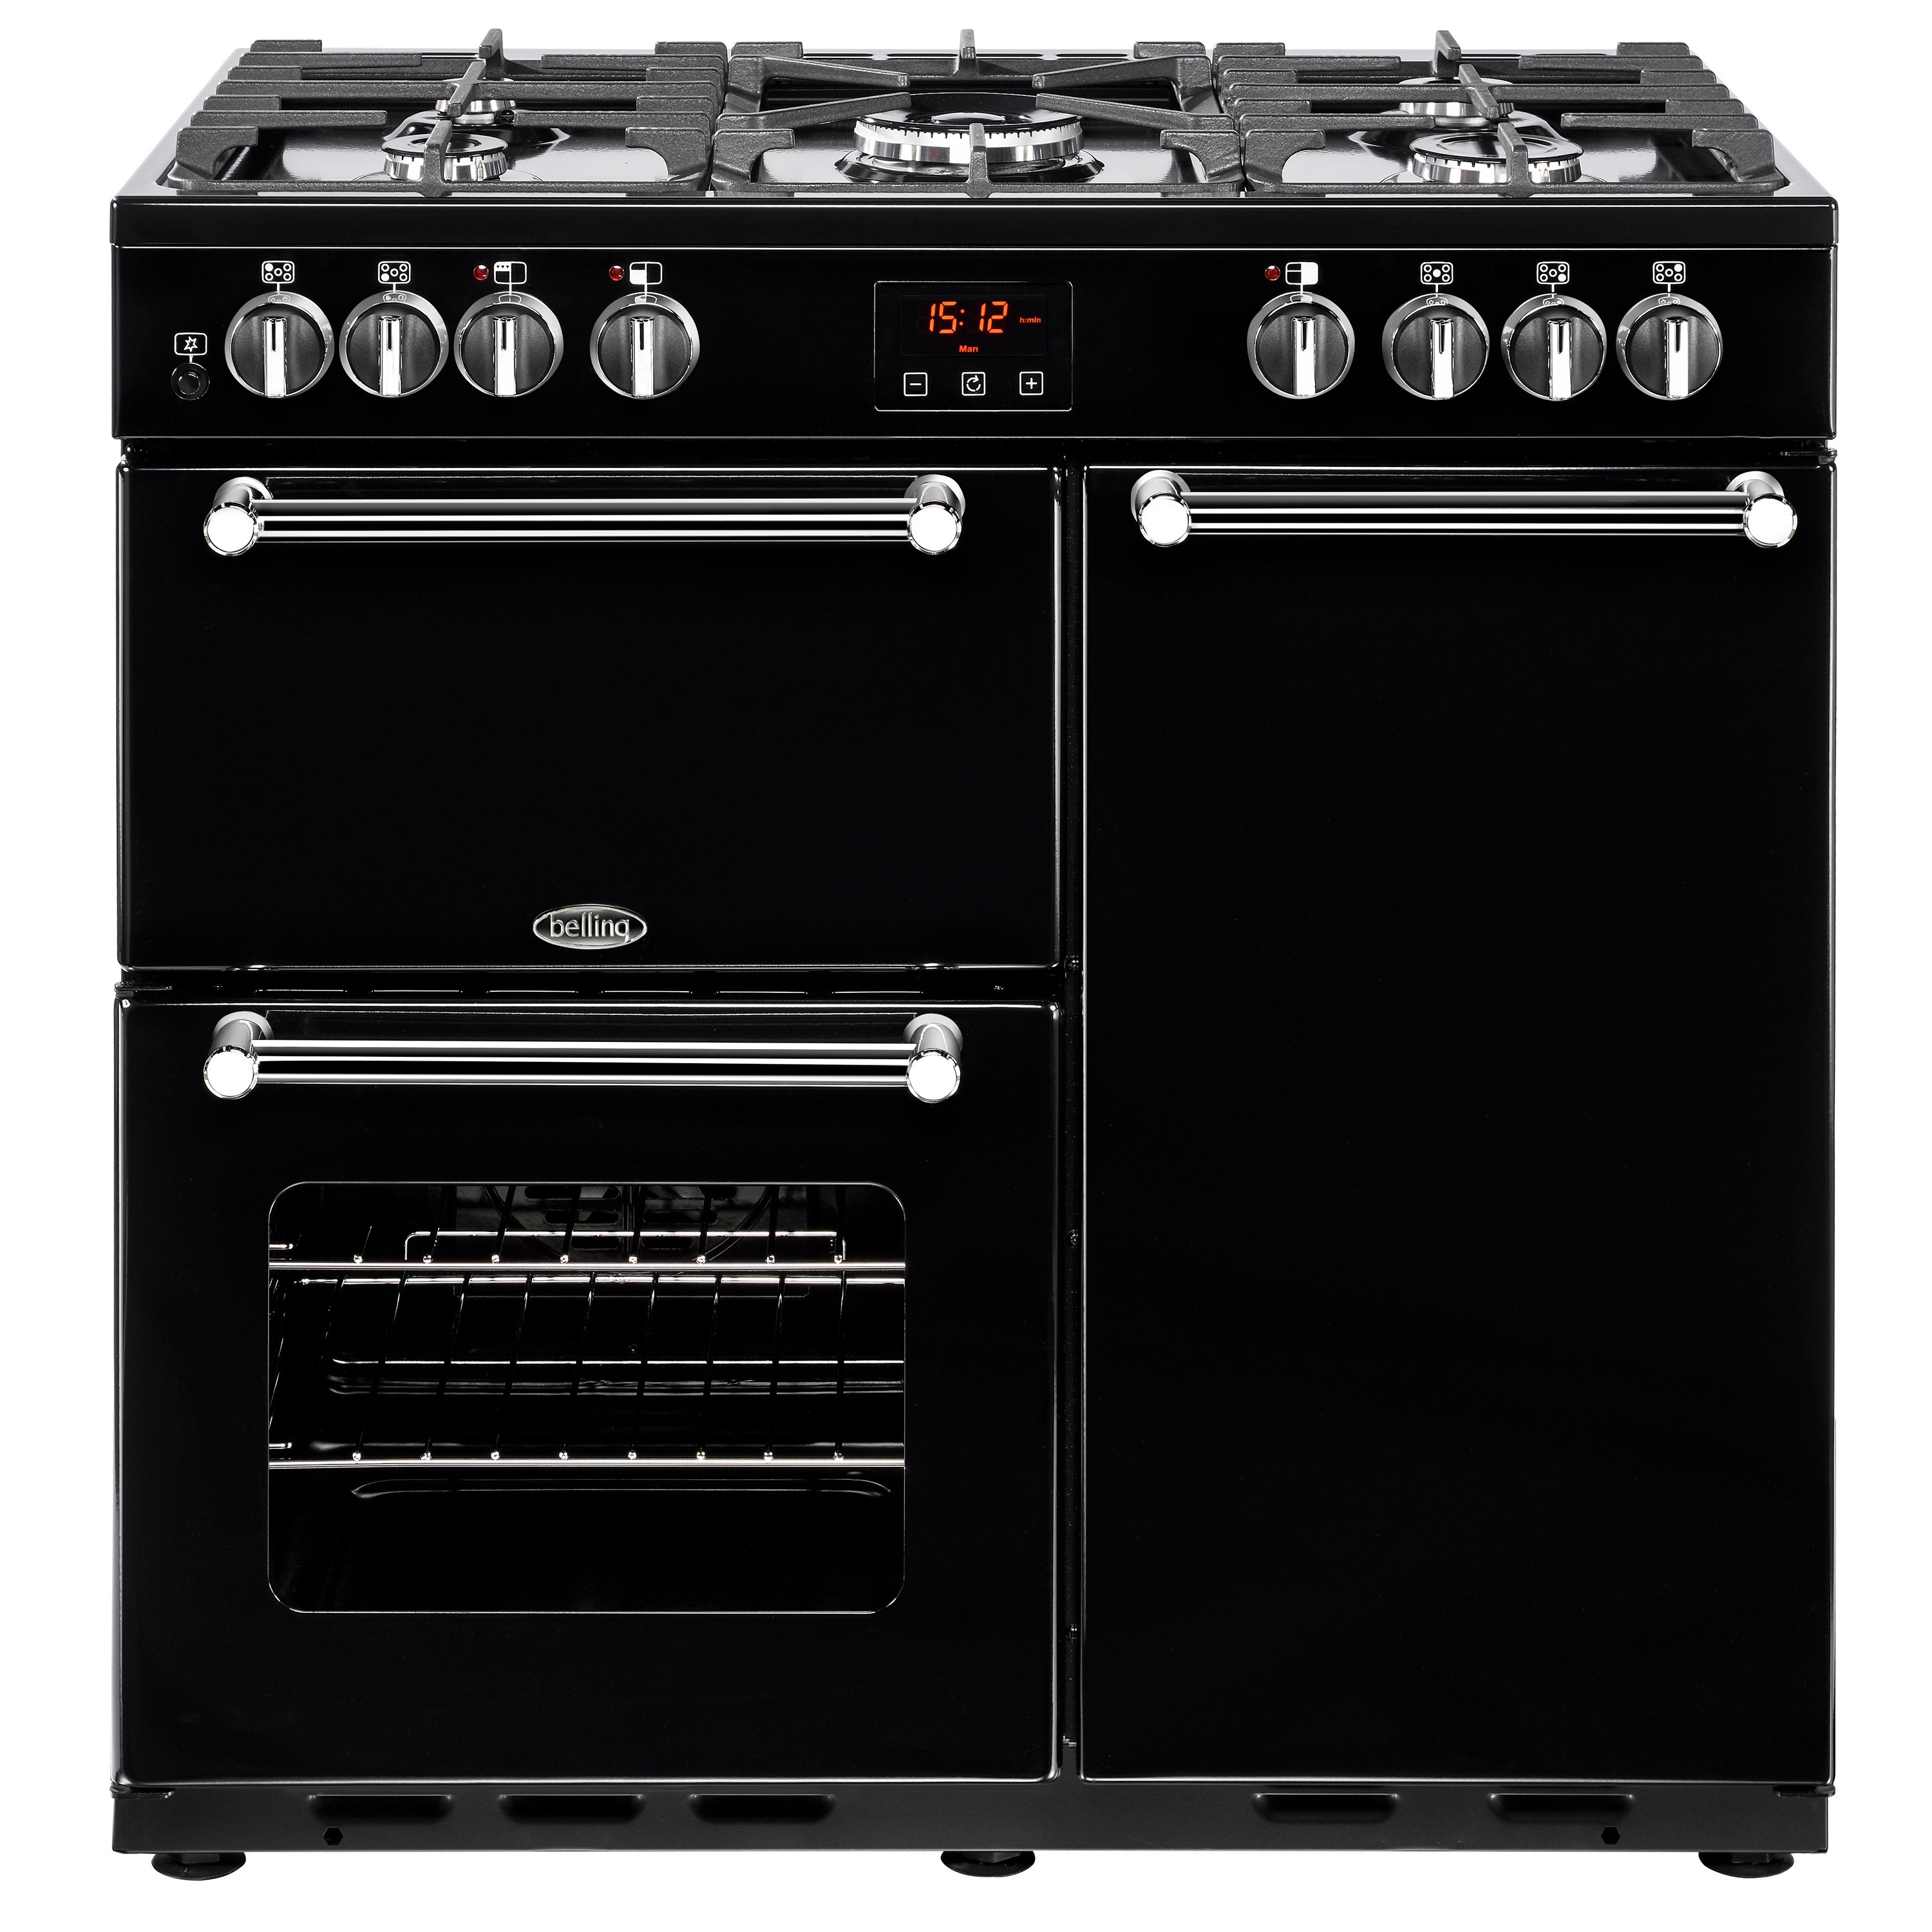 90cm dual fuel range cooker with 5 burner gas hob, conventional electric oven & grill, fanned main oven and tall fanned oven.